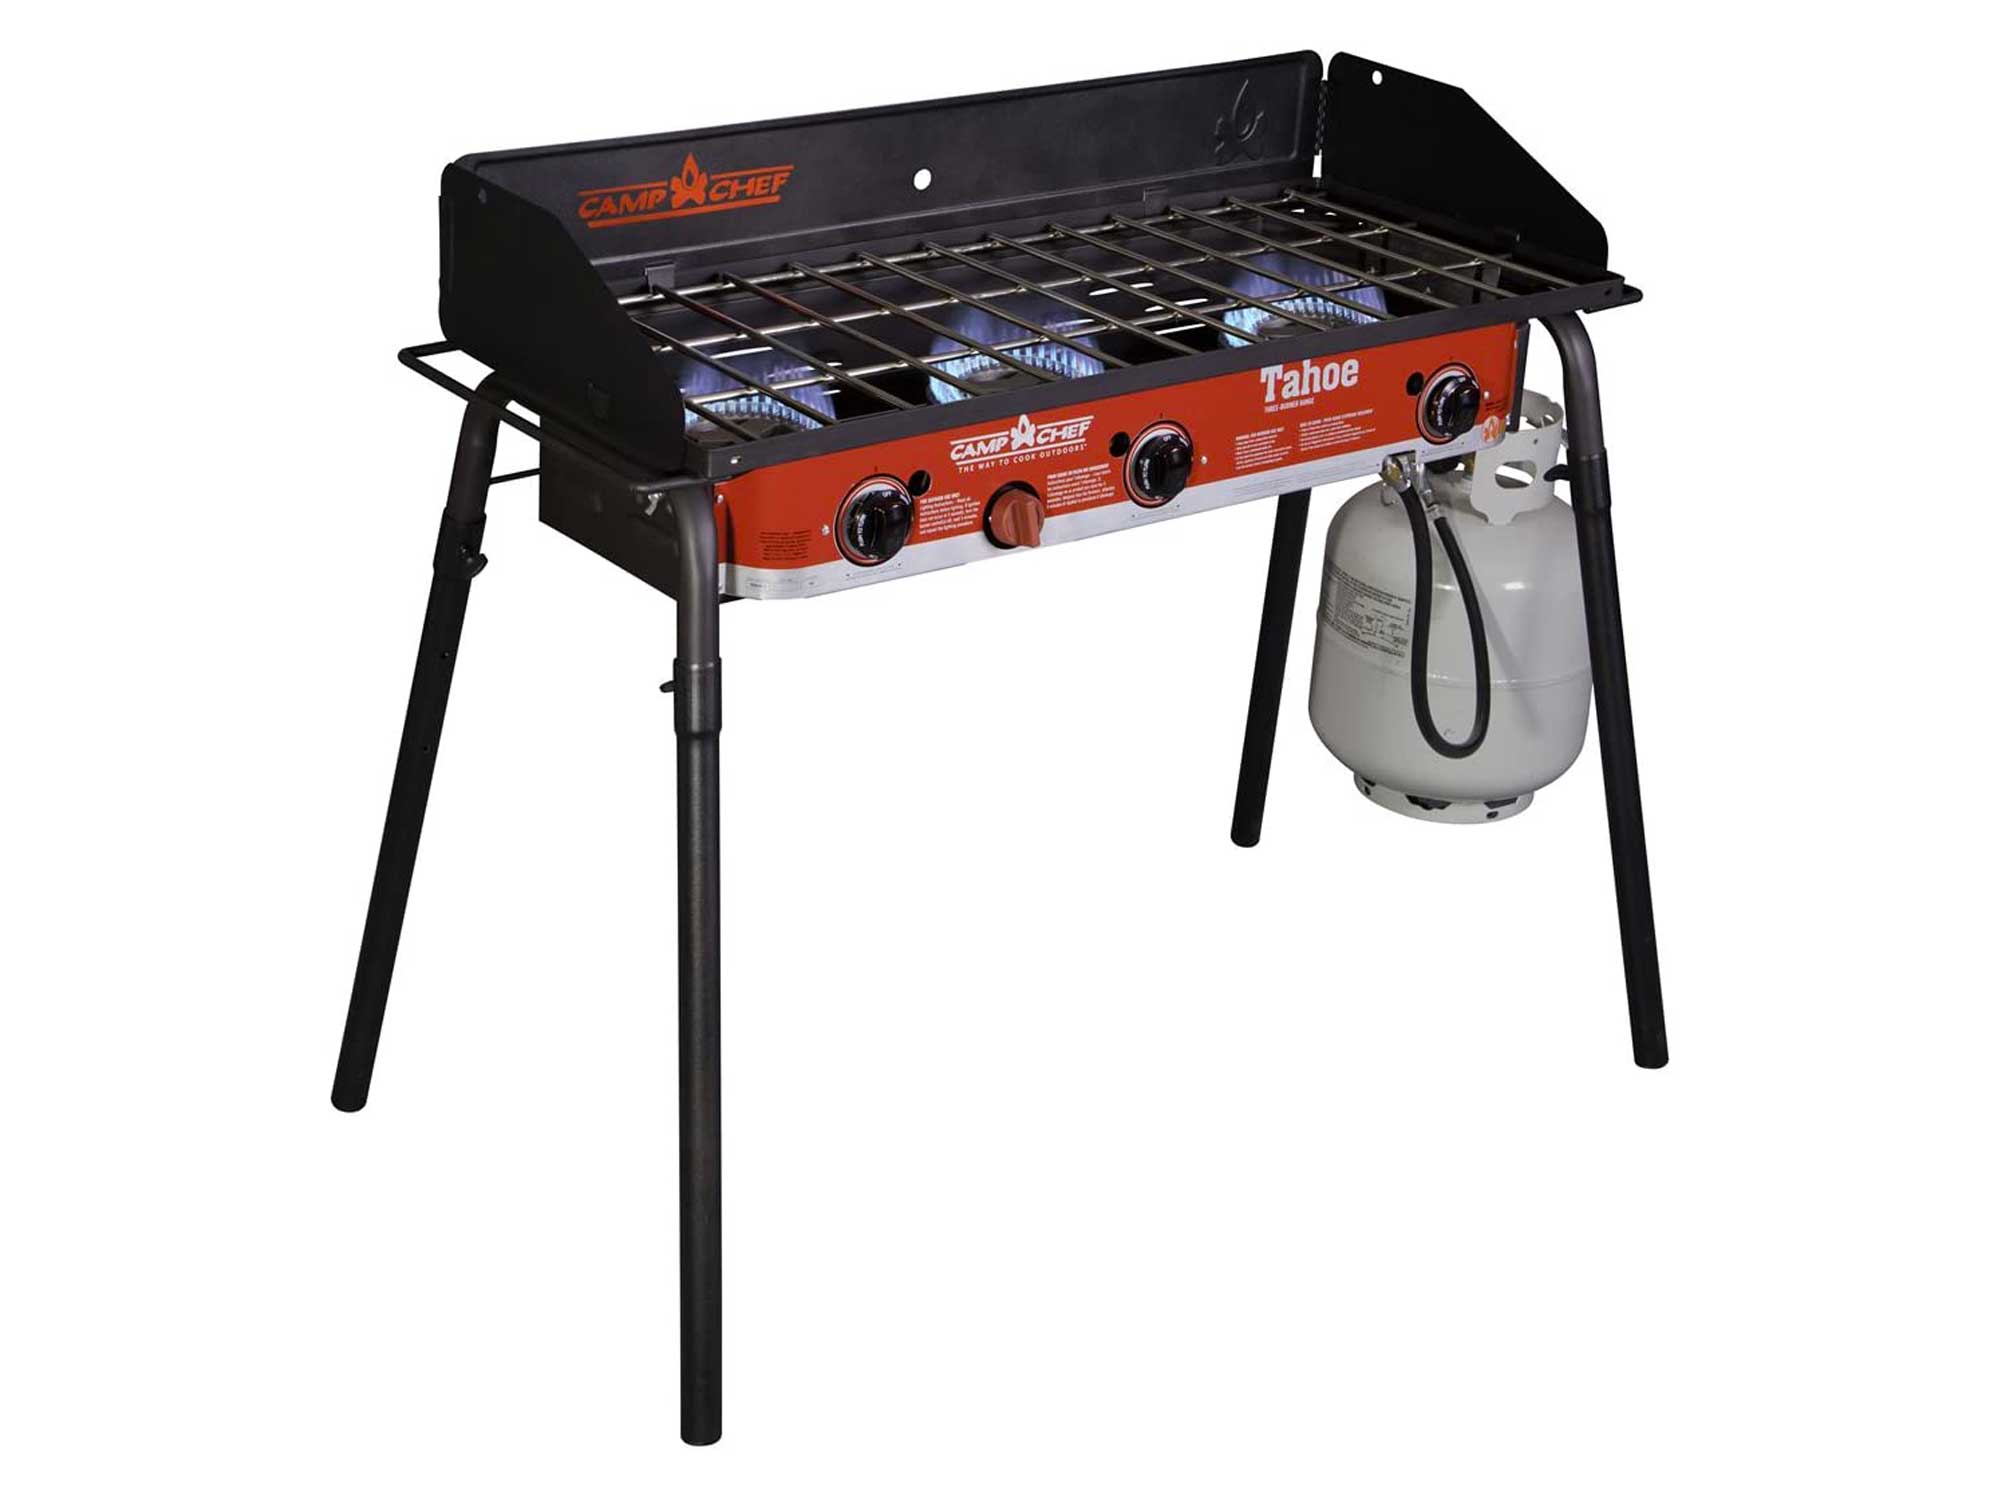 Camp Chef Tahoe Deluxe Three Burner Grill